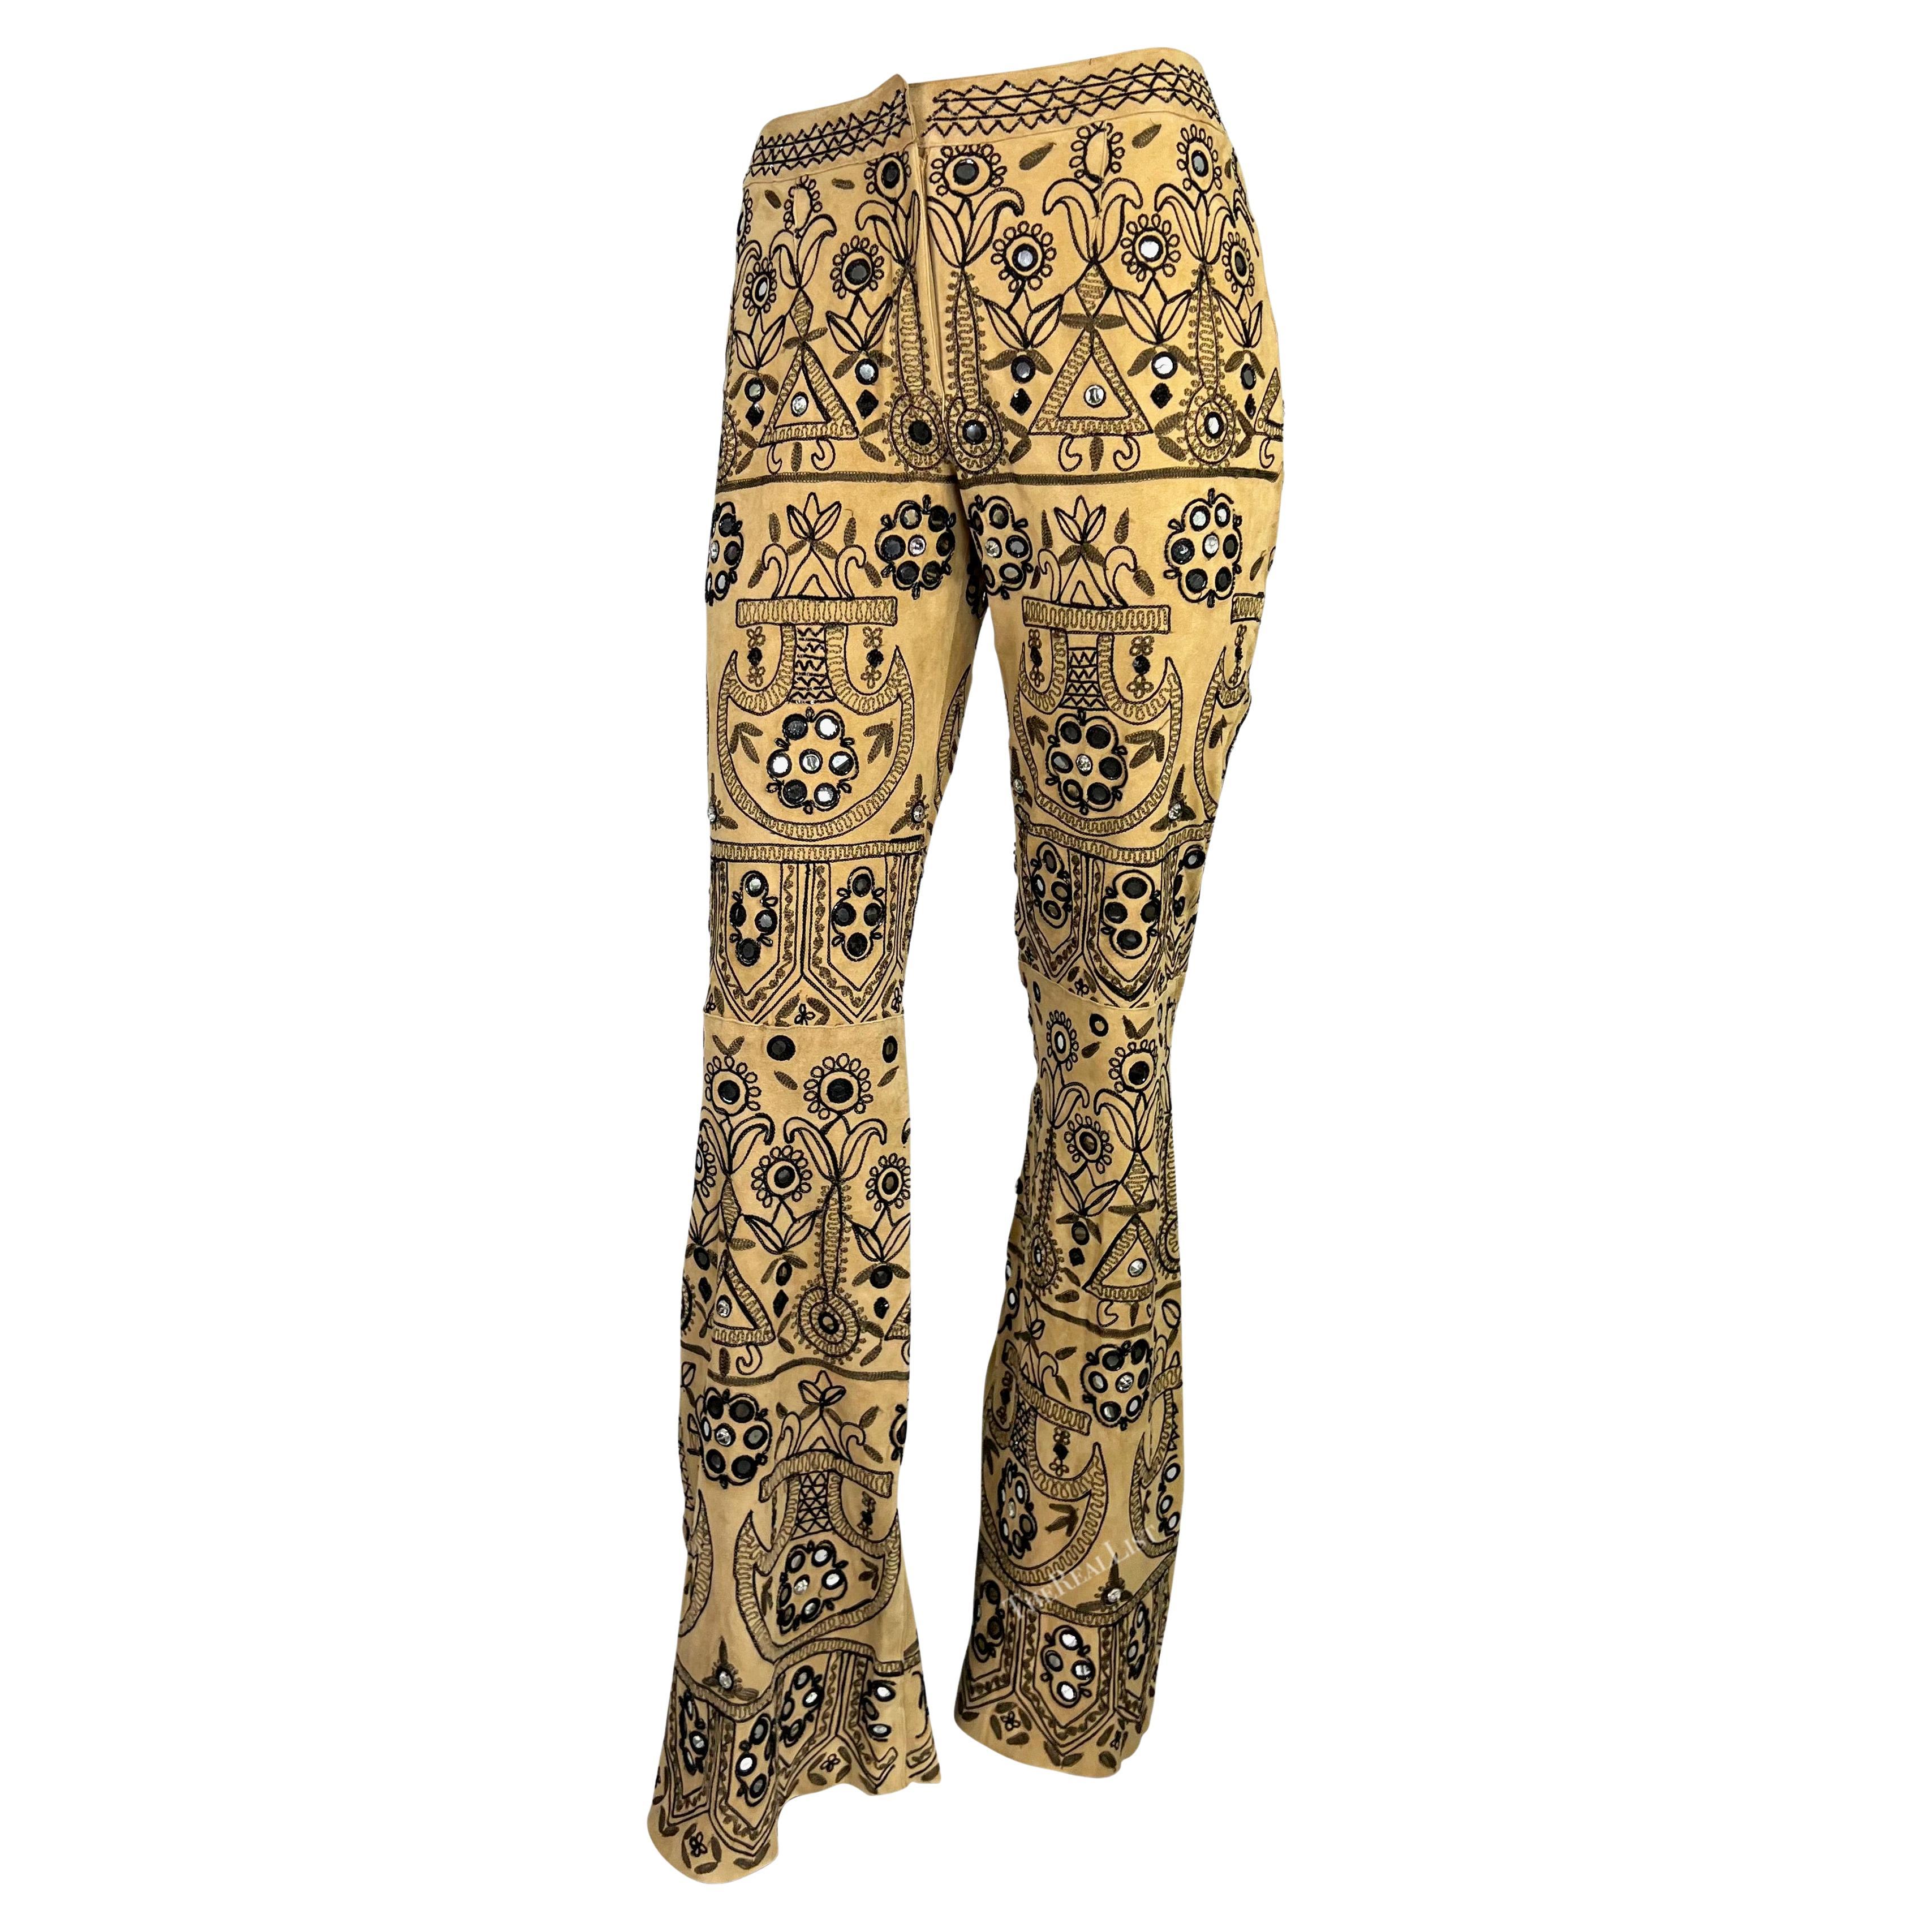 S/S 2001 Dolce & Gabbana Mirror Embroidered Tan Suede Flare Pants For Sale 4